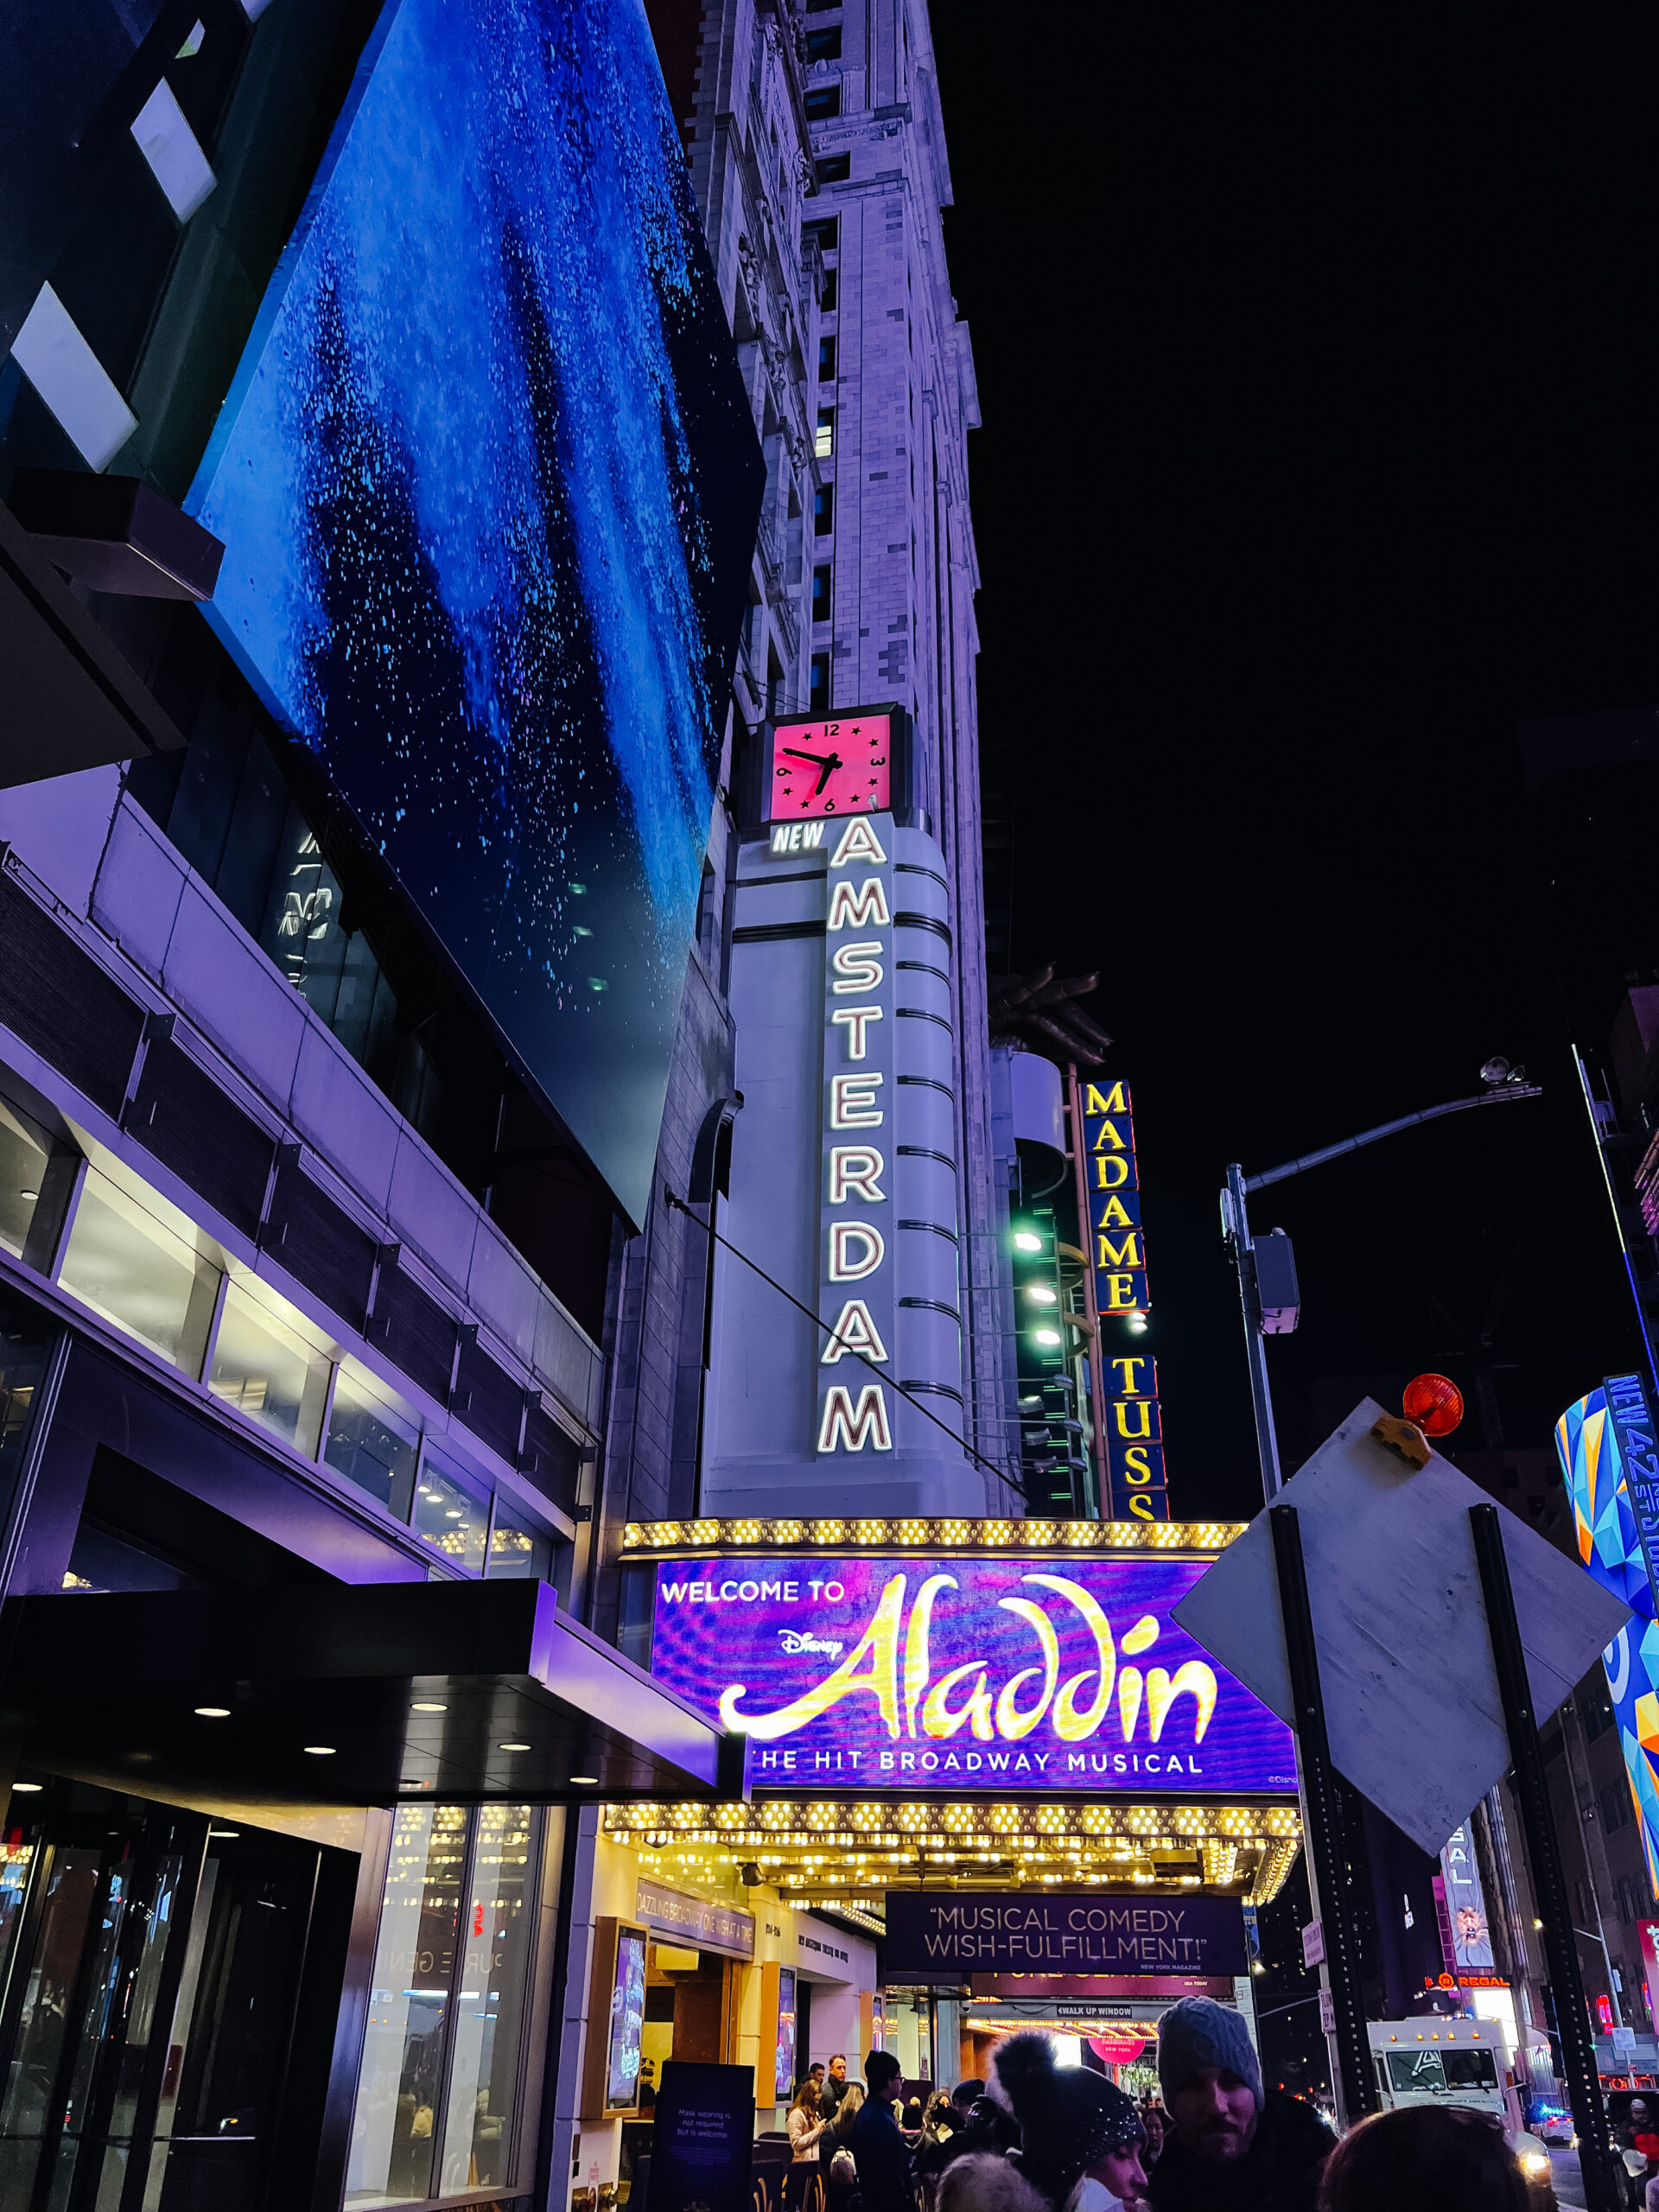 The view from outside the Amsterdam Theatre in New York City featuring Aladdin